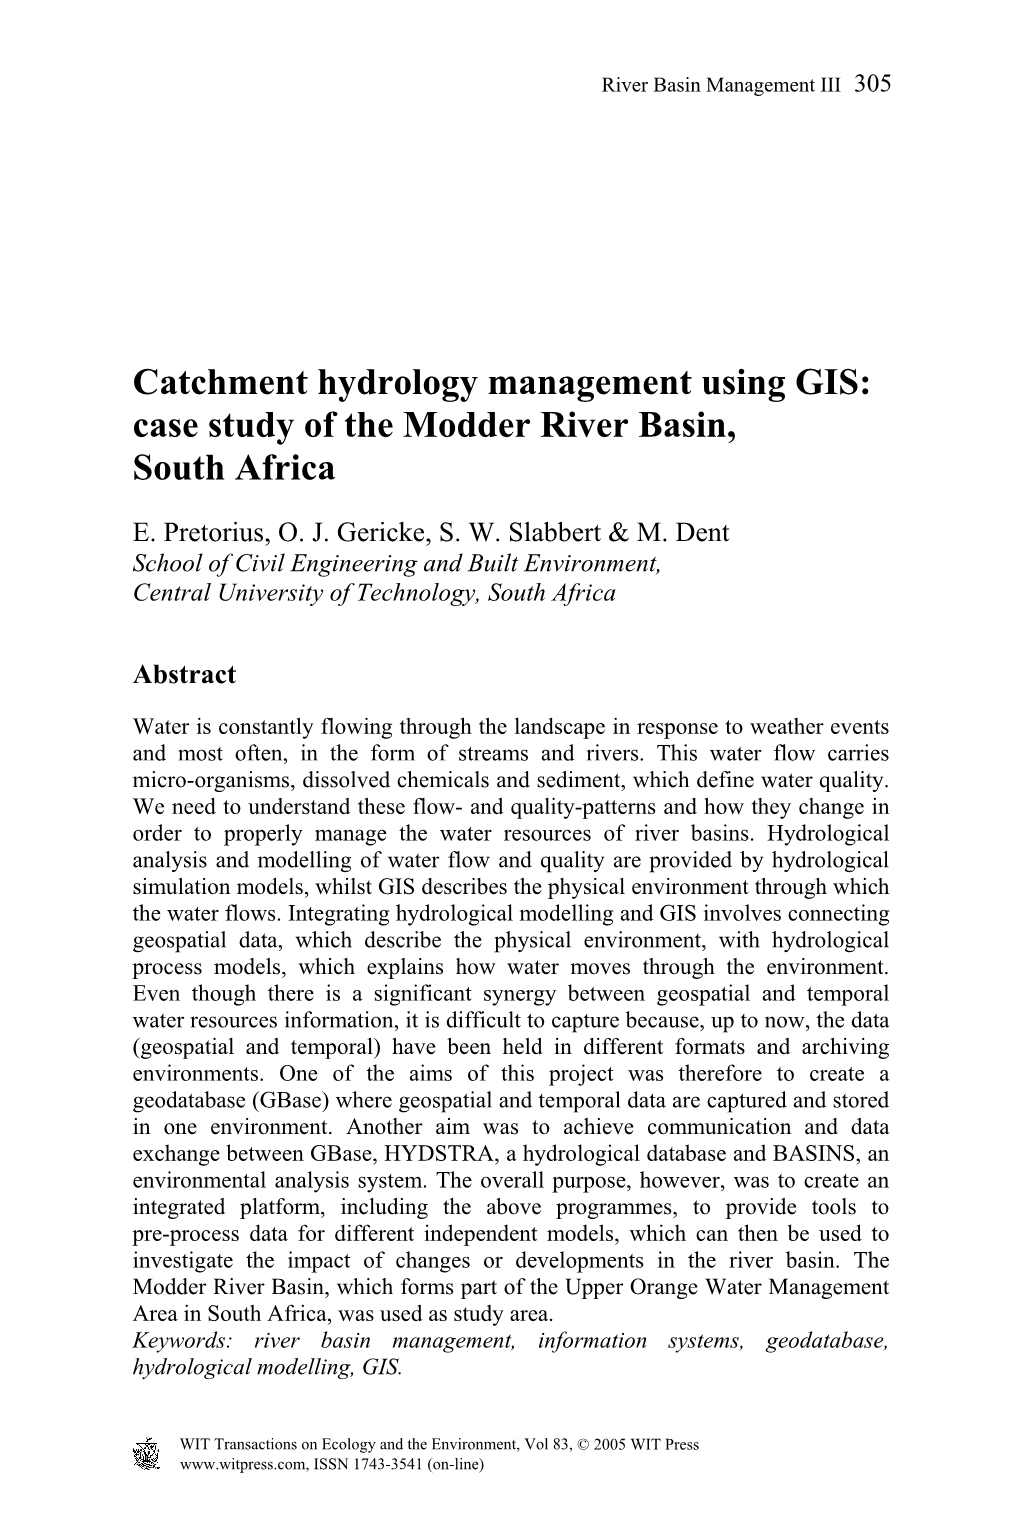 Case Study of the Modder River Basin, South Africa